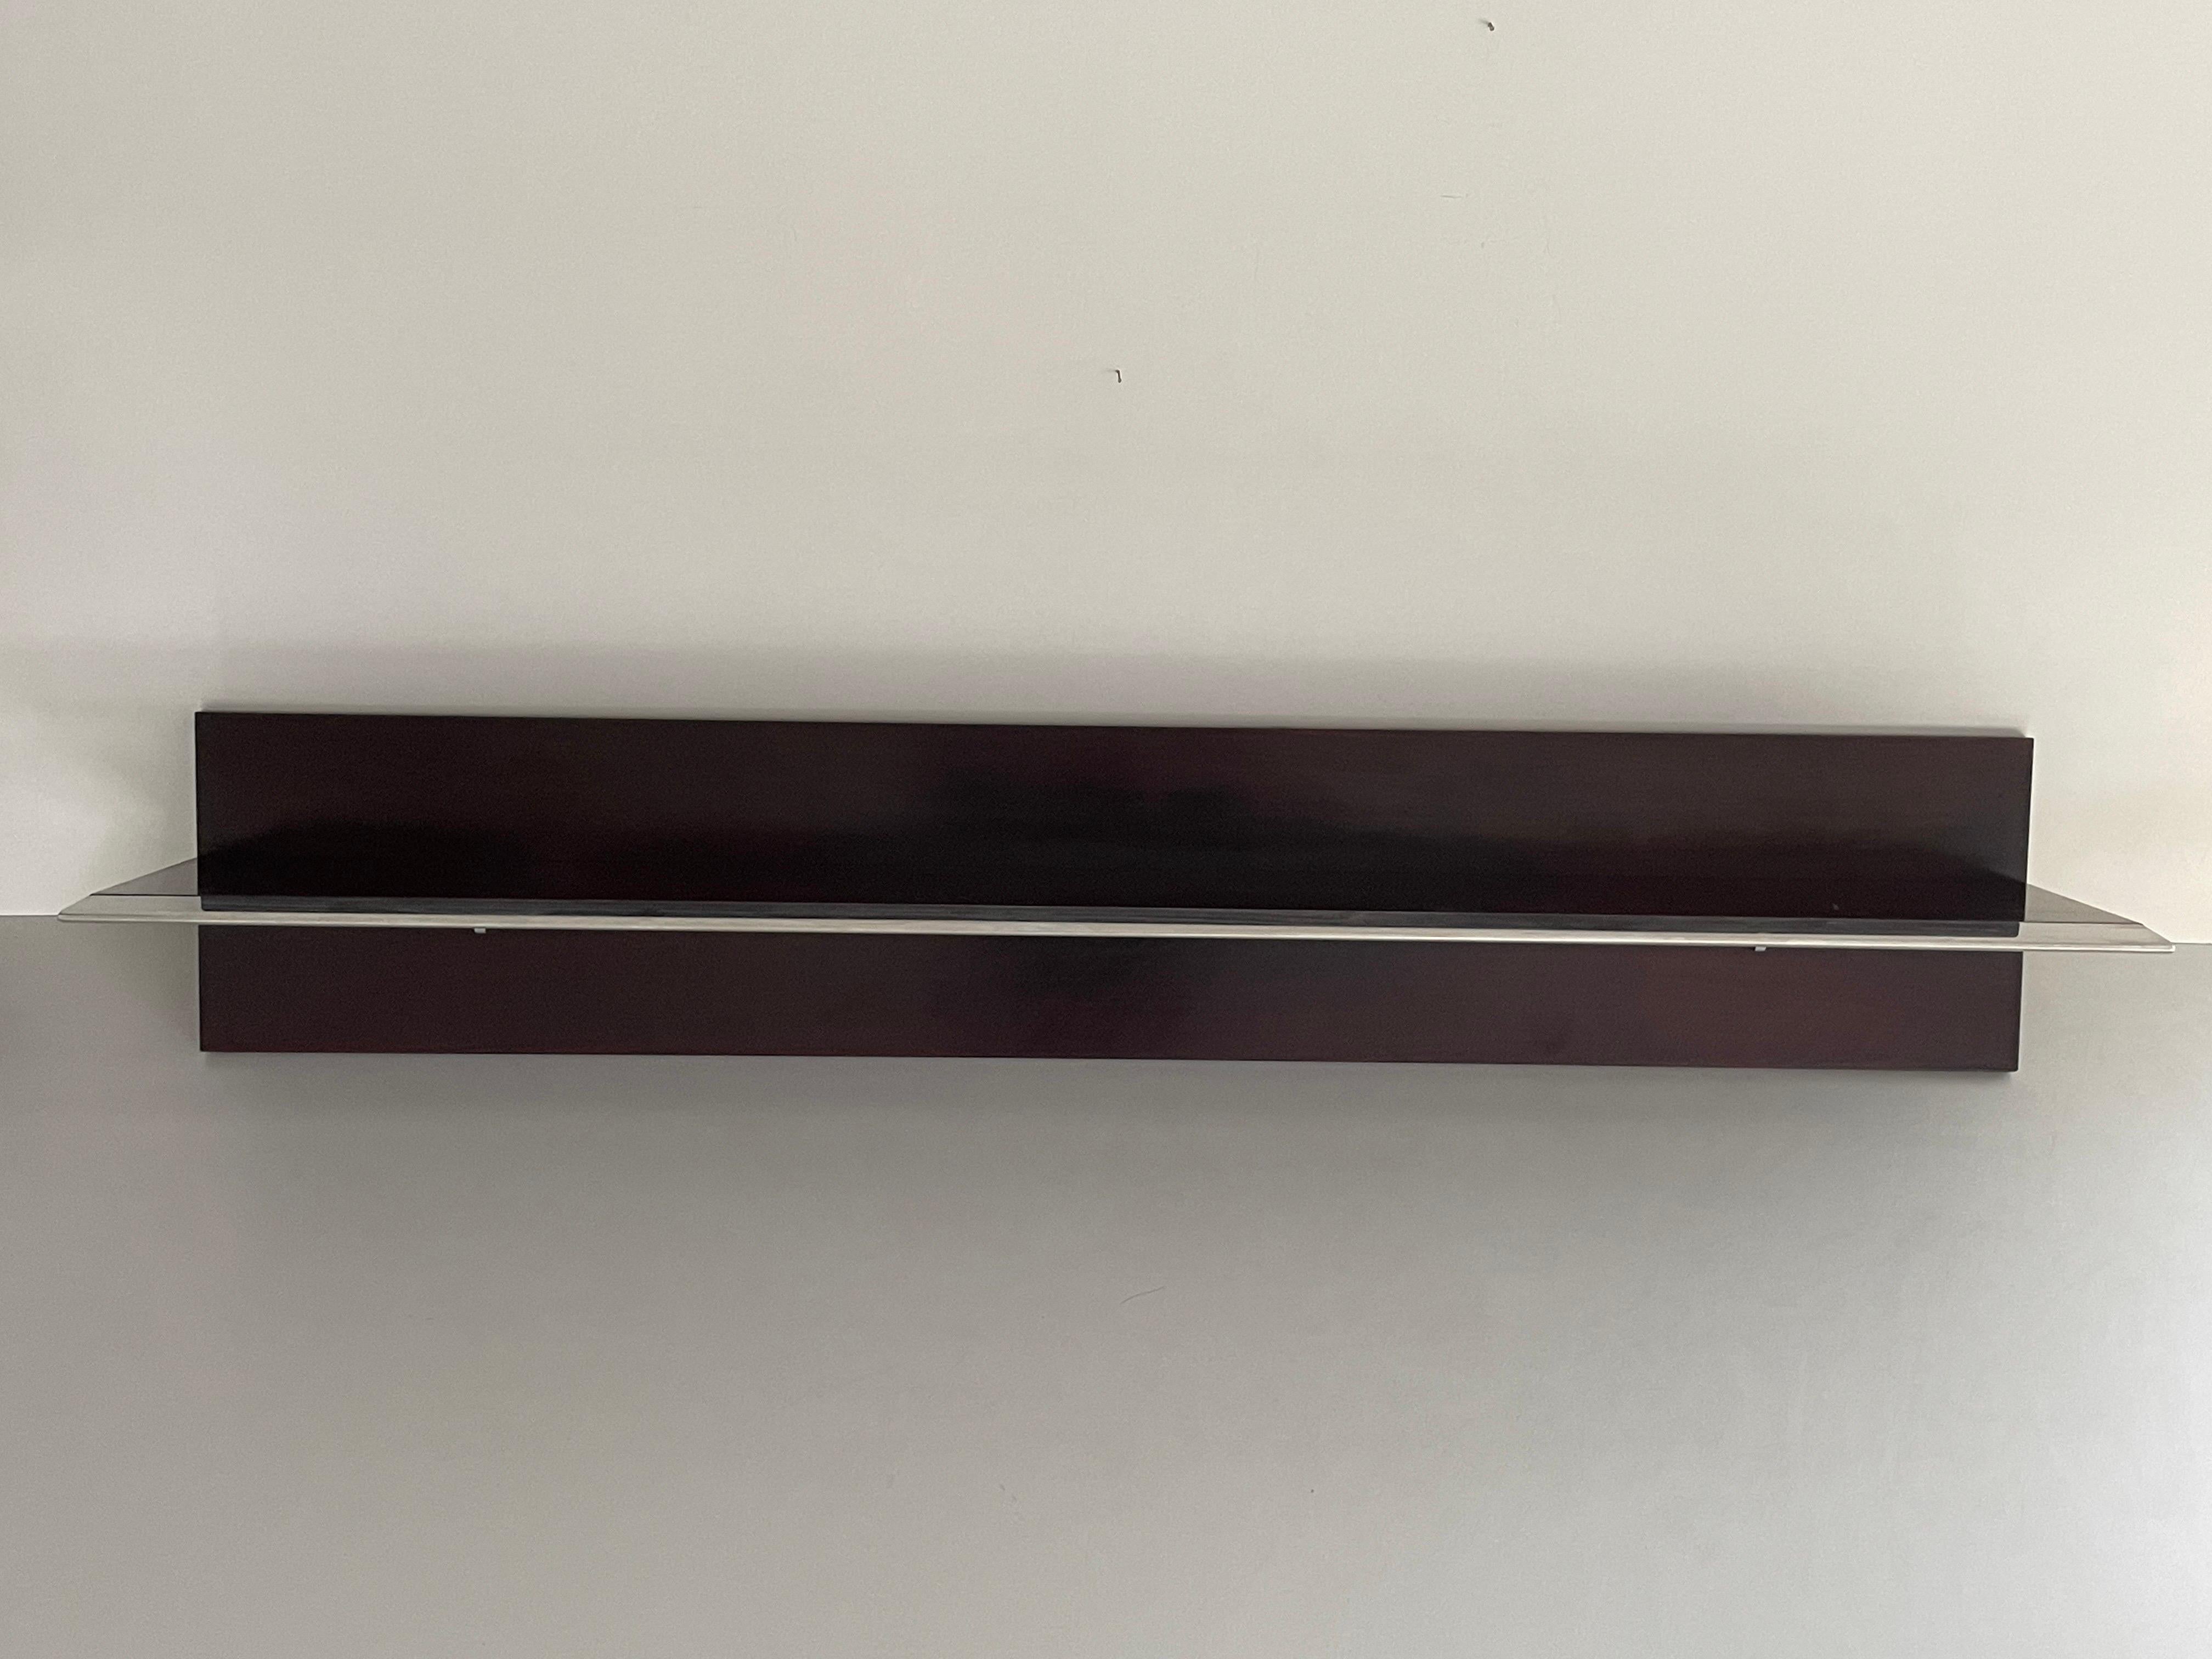 Mid-century Modern Rosewood Large Shelf Steel Cover by Saporiti, 1960s, Italy

No damage, no crack.
Wear consistent with age and use.

Measurements: 
Height: 28 cm
Width: 150 cm
Depth: 32 cm